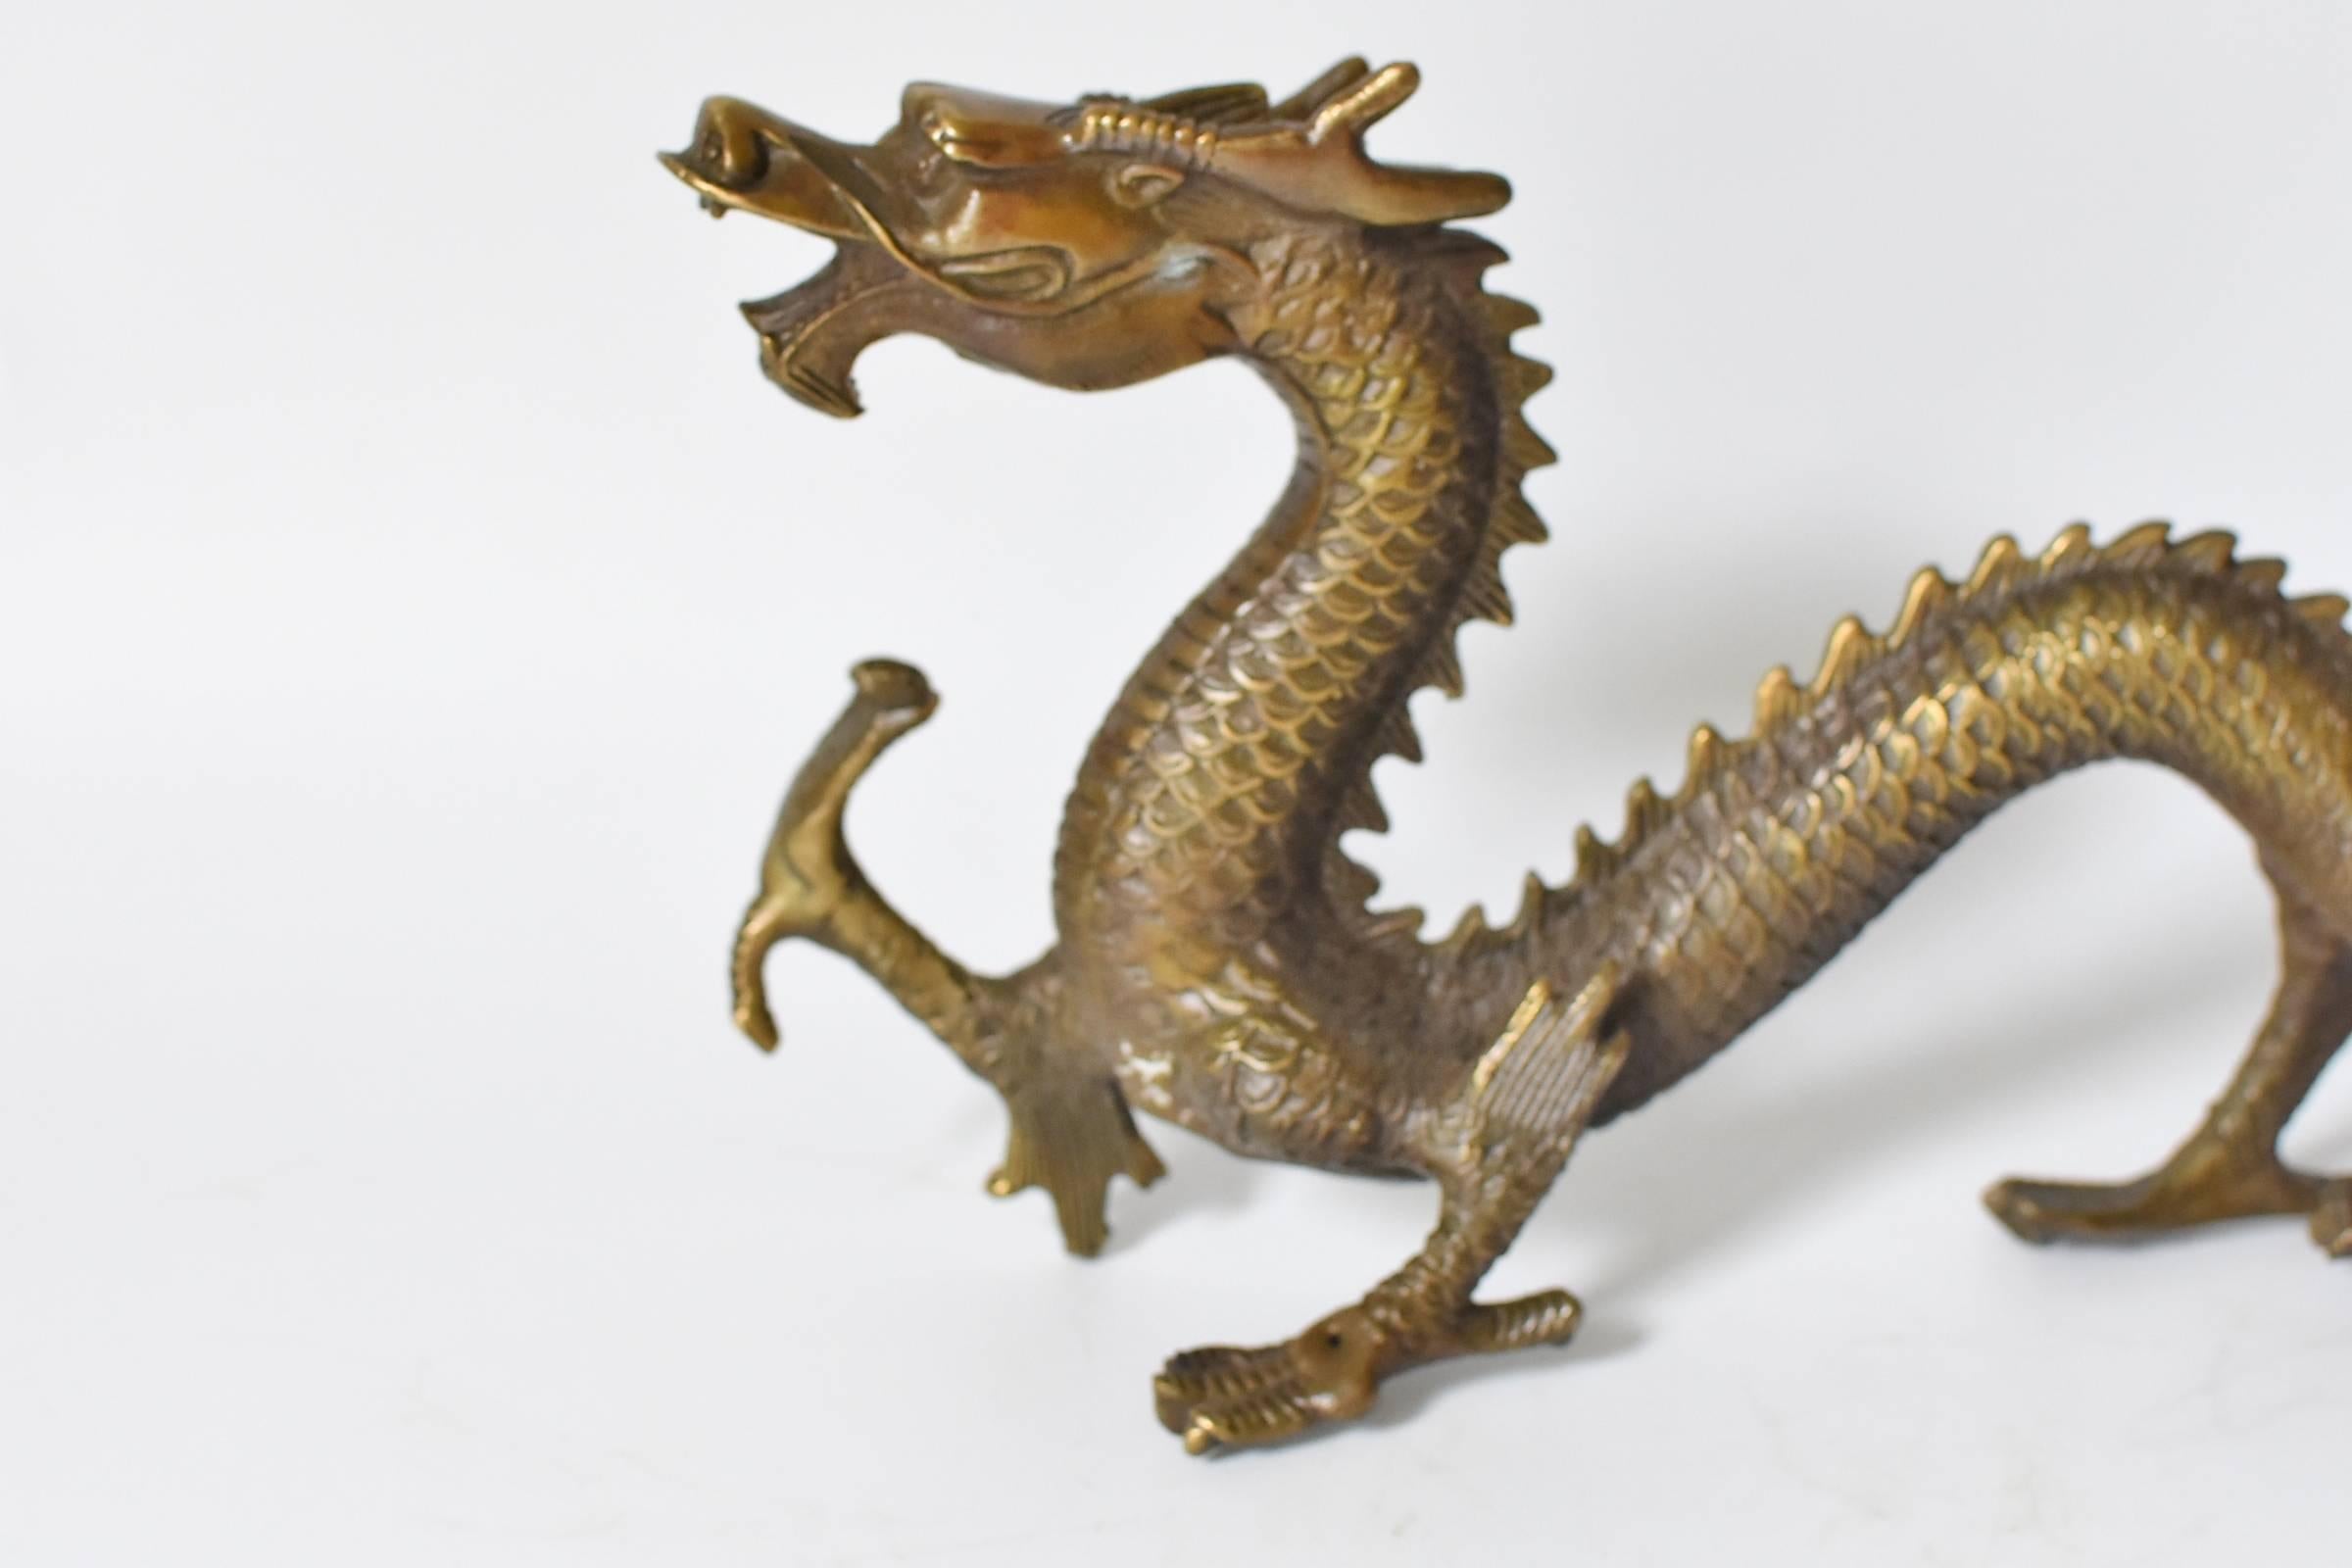 The dragon is the most important symbol in Chinese culture. A sign used by the Emperors, it represents power, leadership and prosperity. This wonderful sculpture captures the dragon in motion. Fine details of scale, paws and horns reflect the